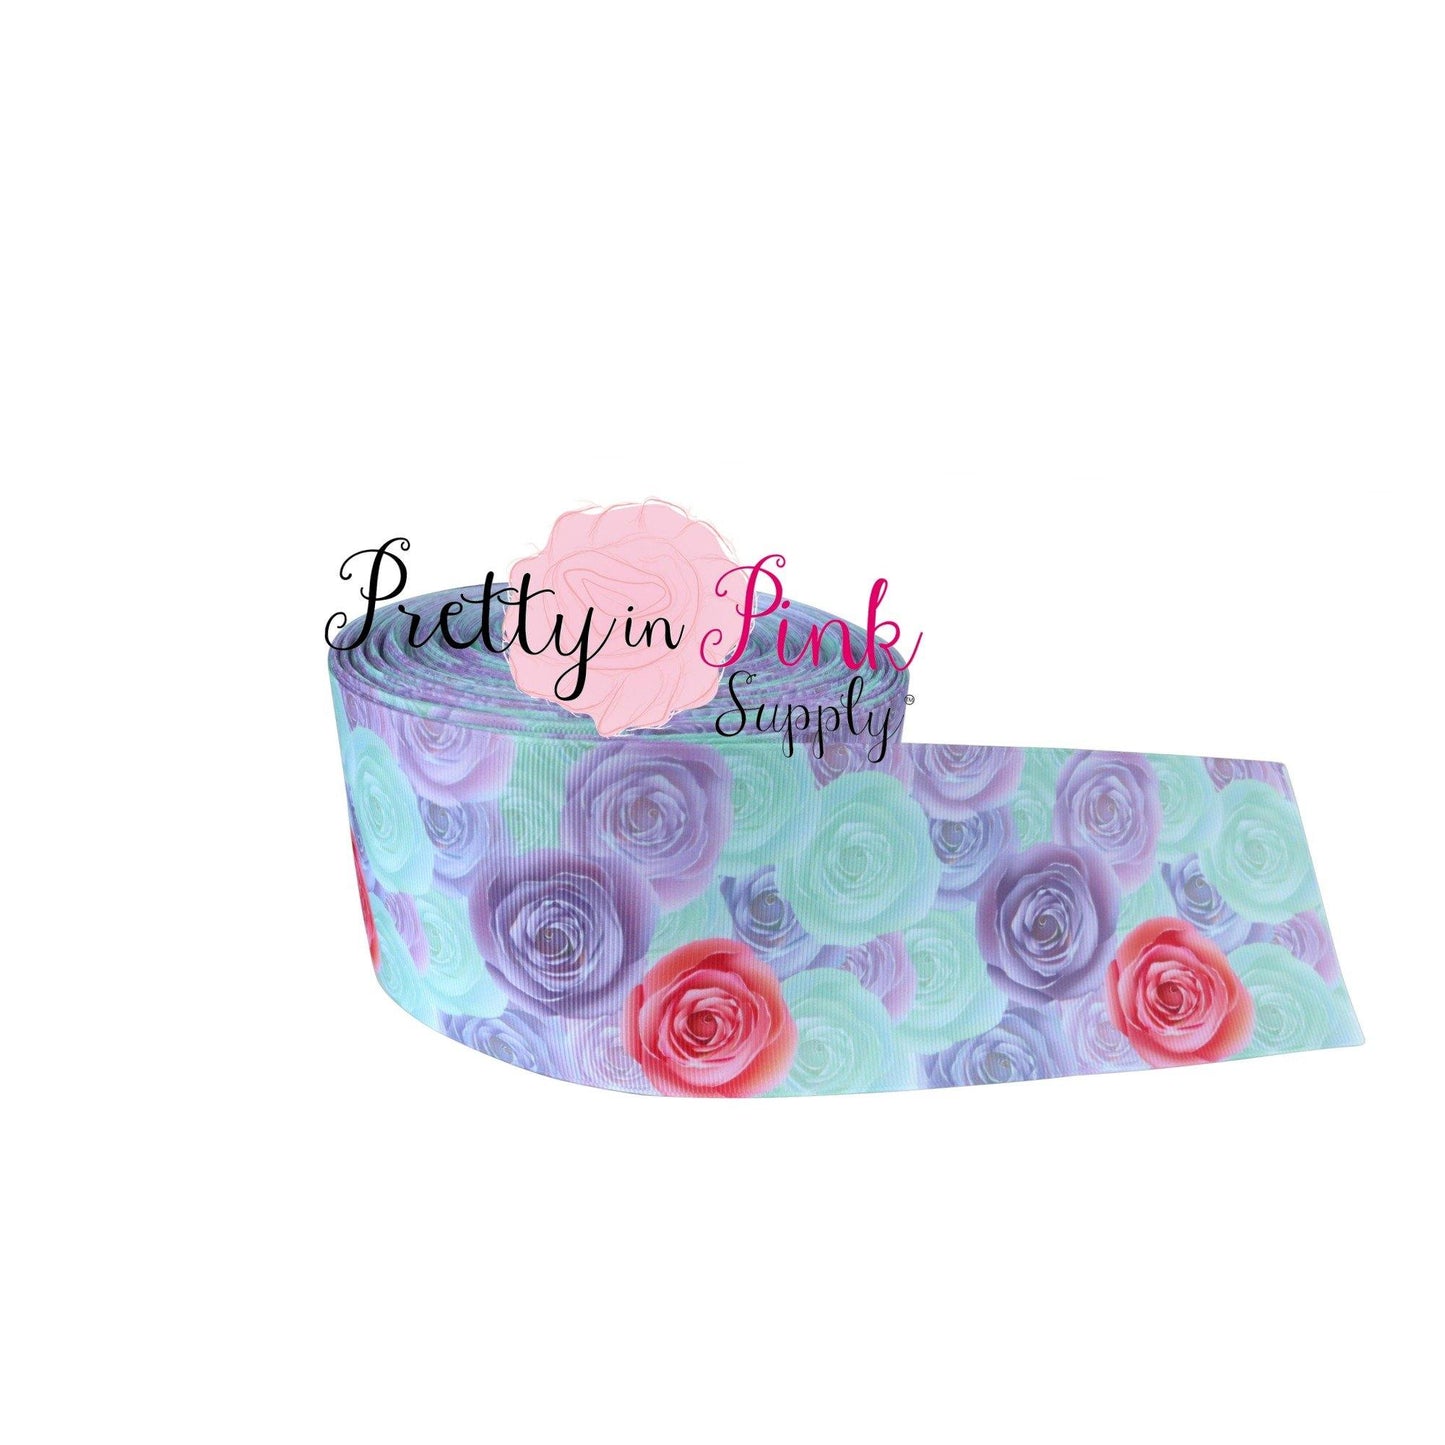 3" Lavender/Mint/Coral ROSE Grosgrain RIBBON - Pretty in Pink Supply